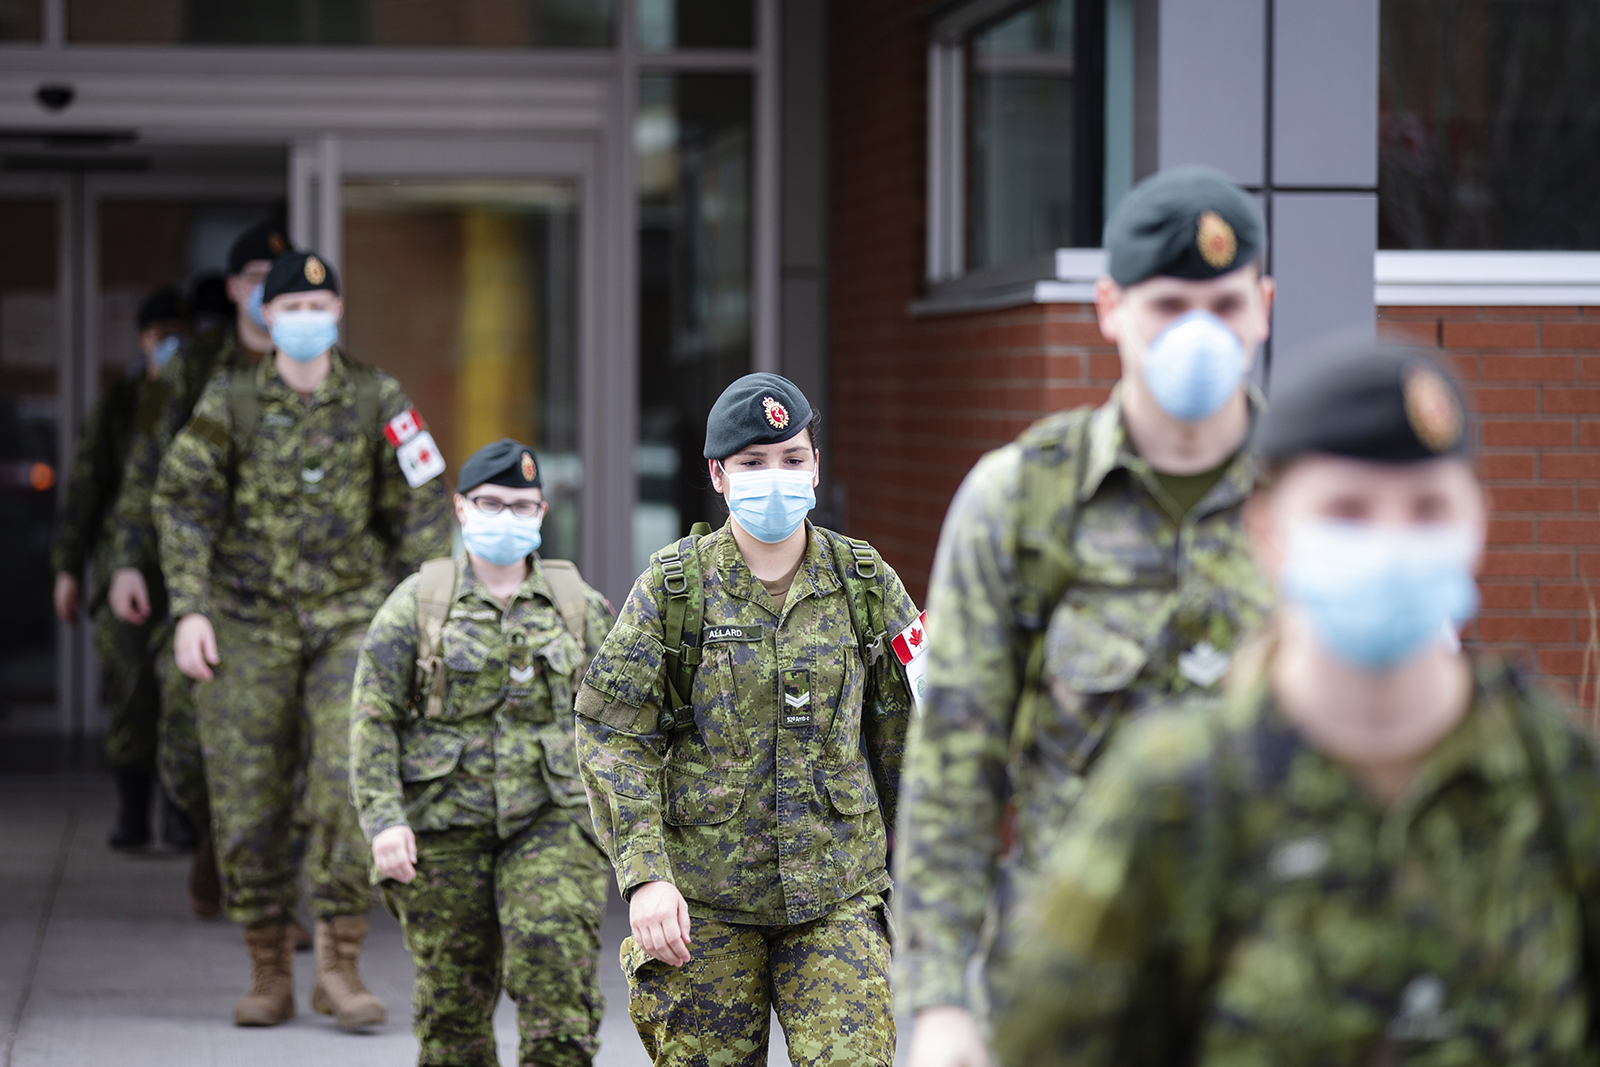 Canadian Armed Forces (CAF) medical personnel leave following their shift at the Centre Valeo St. Lambert seniors' long-term care home in St. Lambert, Quebec, Canada, on Friday, April 24.